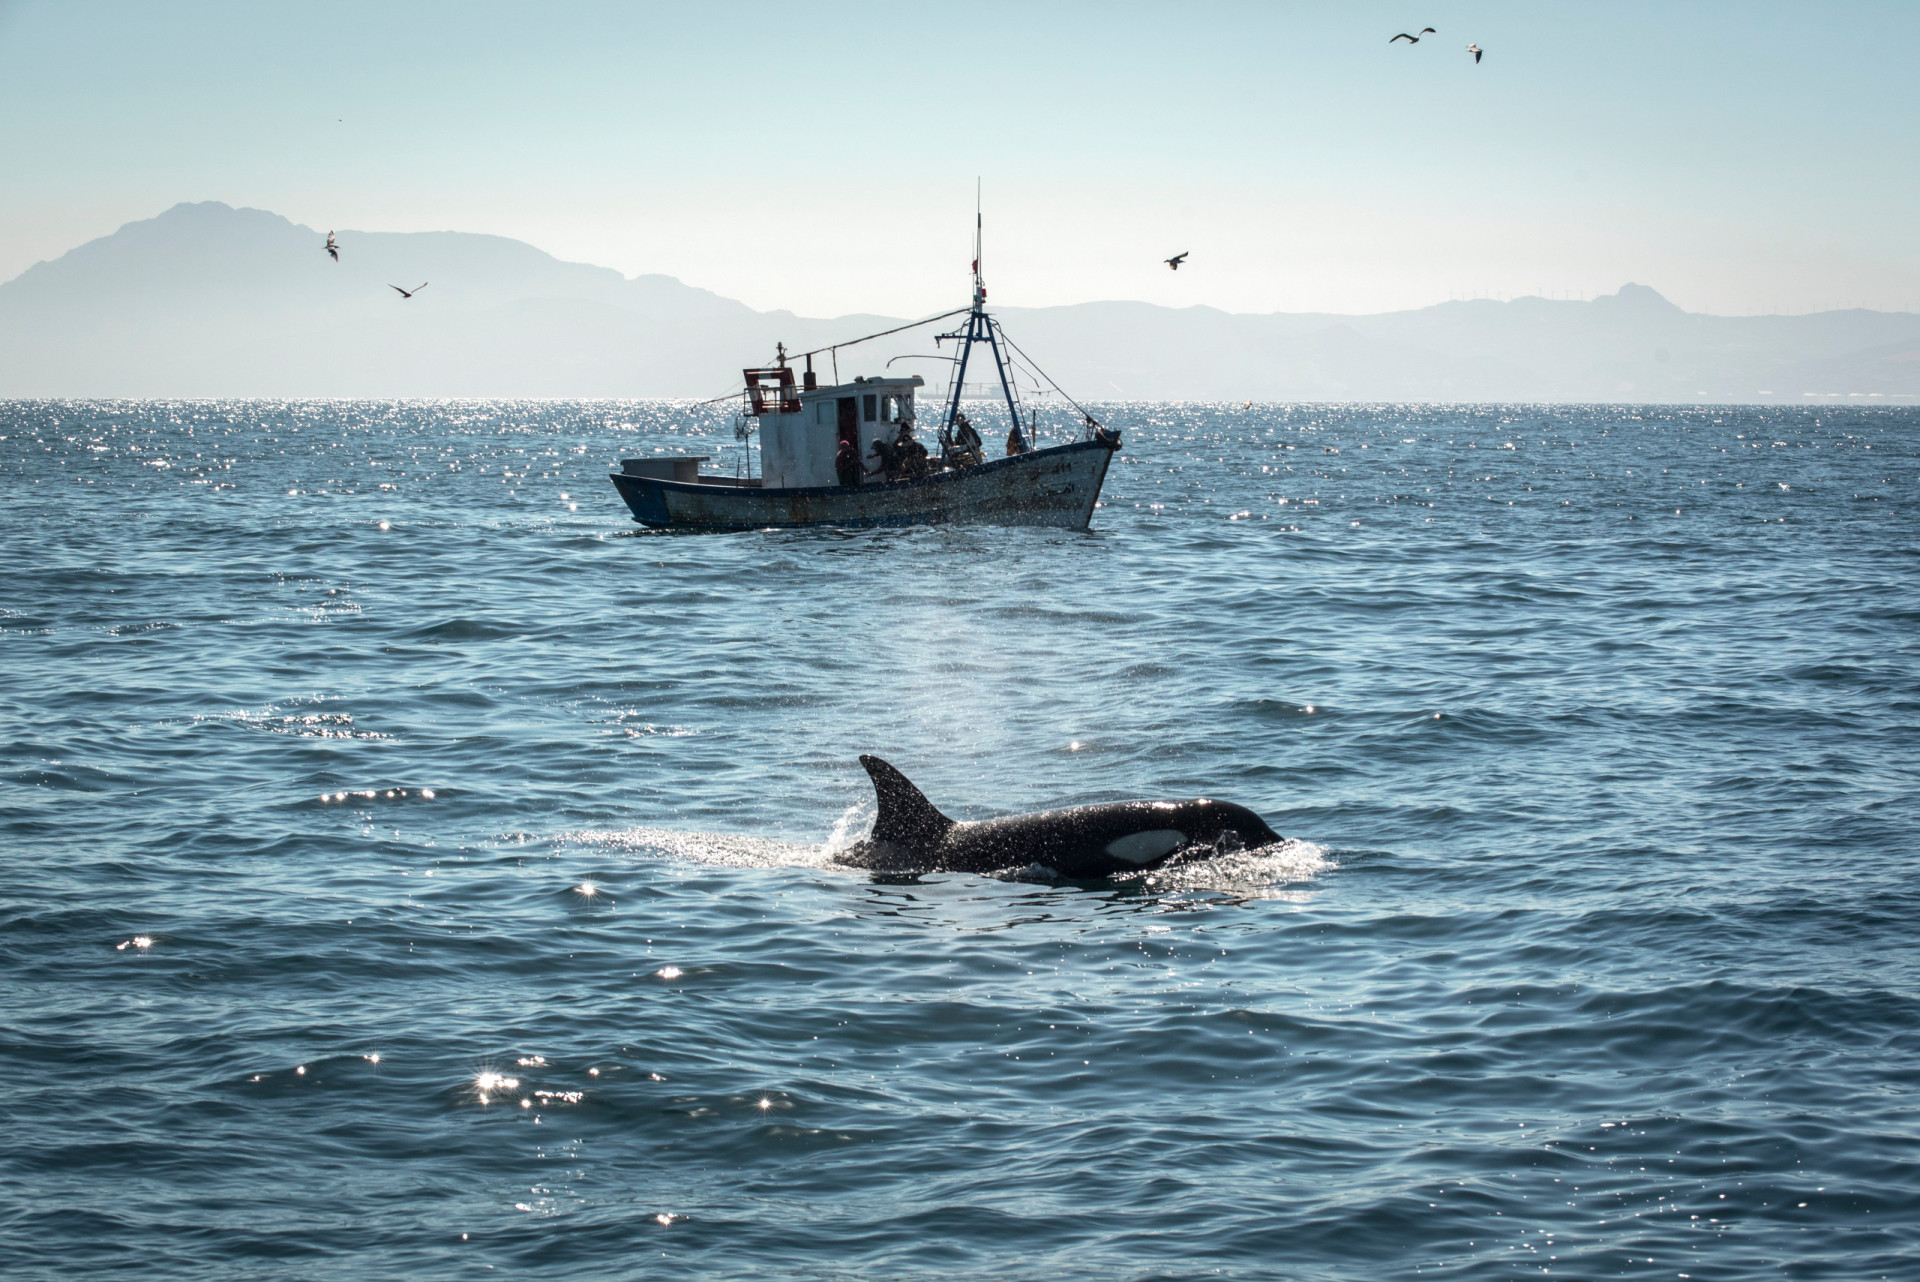 <p>In a string of aggressive incidents beginning in 2020, orcas started attacking boats off the southwest coast of Europe, according to a study published in June 2022 in the journal Marine Mammal Science. These attacks have become increasingly more frequent with time.</p><p><a href="https://www.msn.com/en-us/community/channel/vid-7xx8mnucu55yw63we9va2gwr7uihbxwc68fxqp25x6tg4ftibpra?cvid=94631541bc0f4f89bfd59158d696ad7e">Follow us and access great exclusive content every day</a></p>